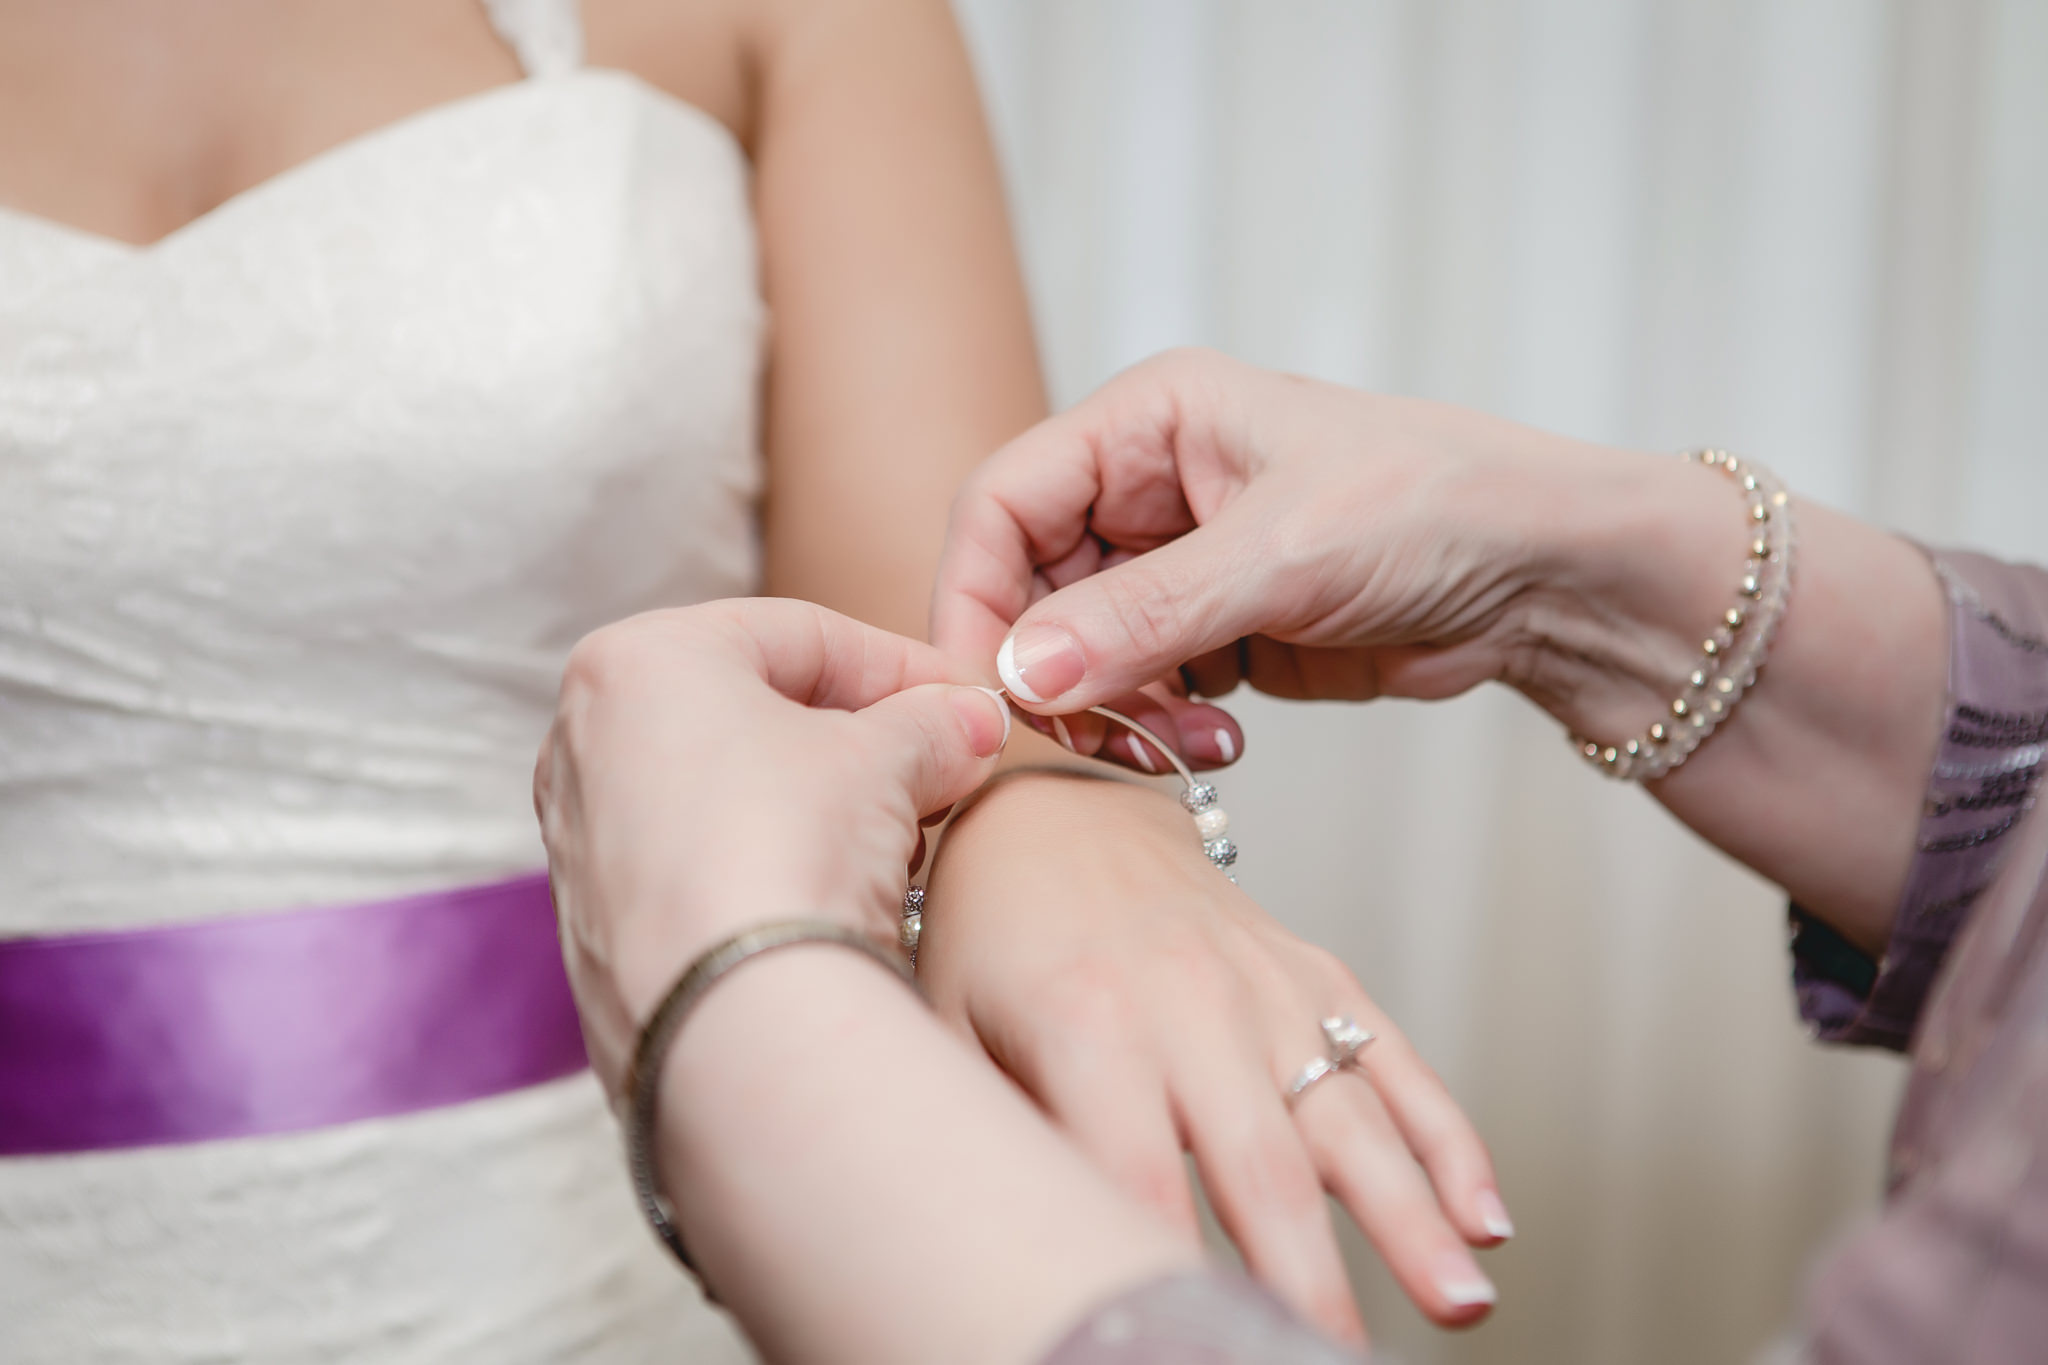 Mother of the bride putting a bracelet on the bride's wrist